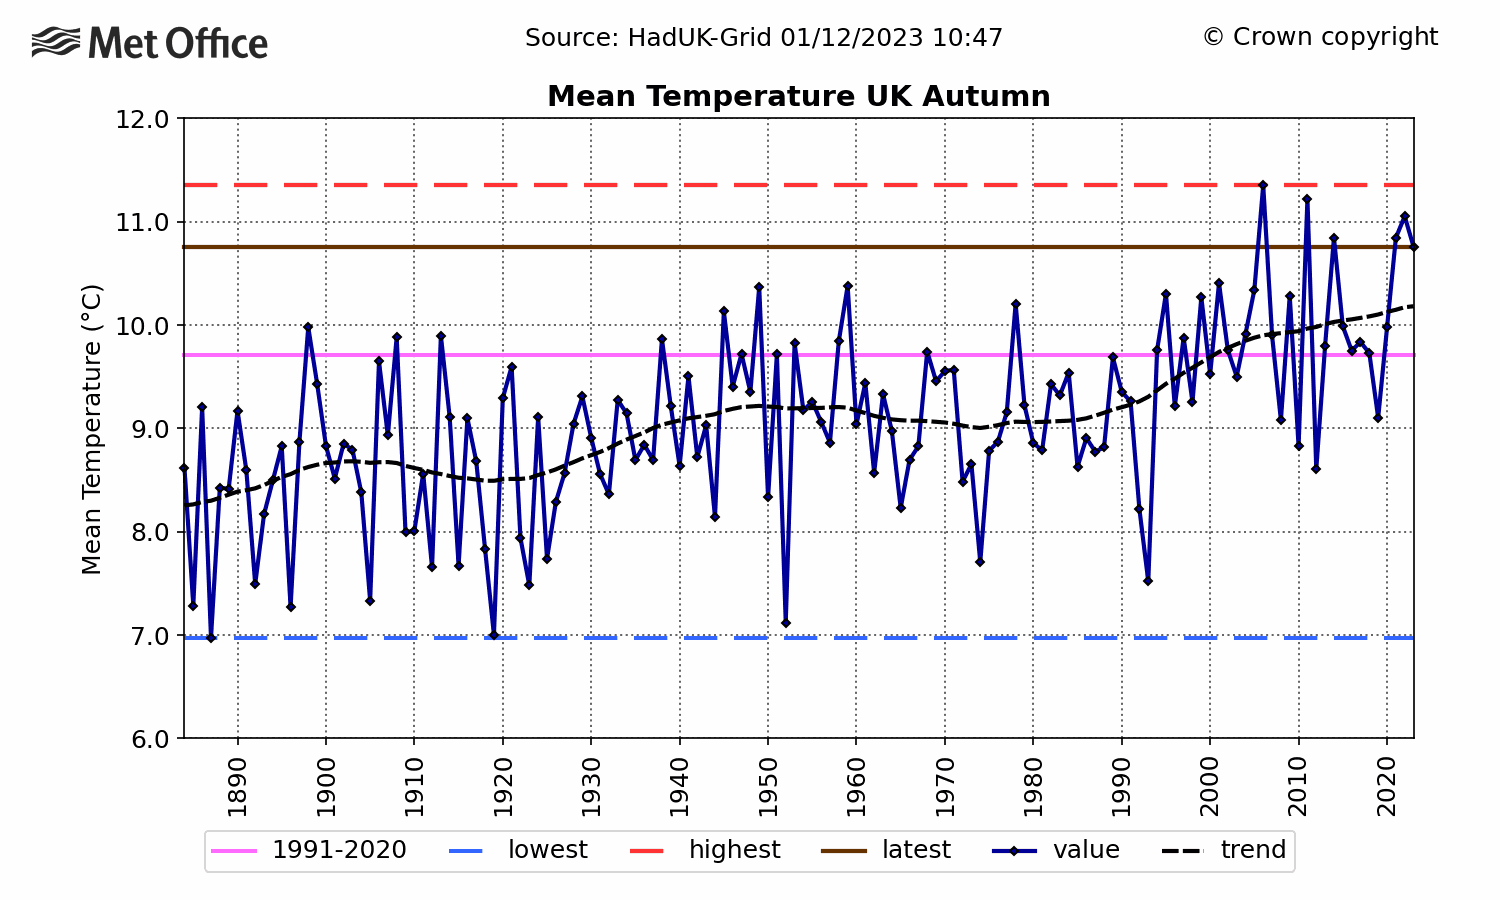 Graph showing UK Autumn mean temperature over time, showing annual variability with a an increasing trend in mean temperature.